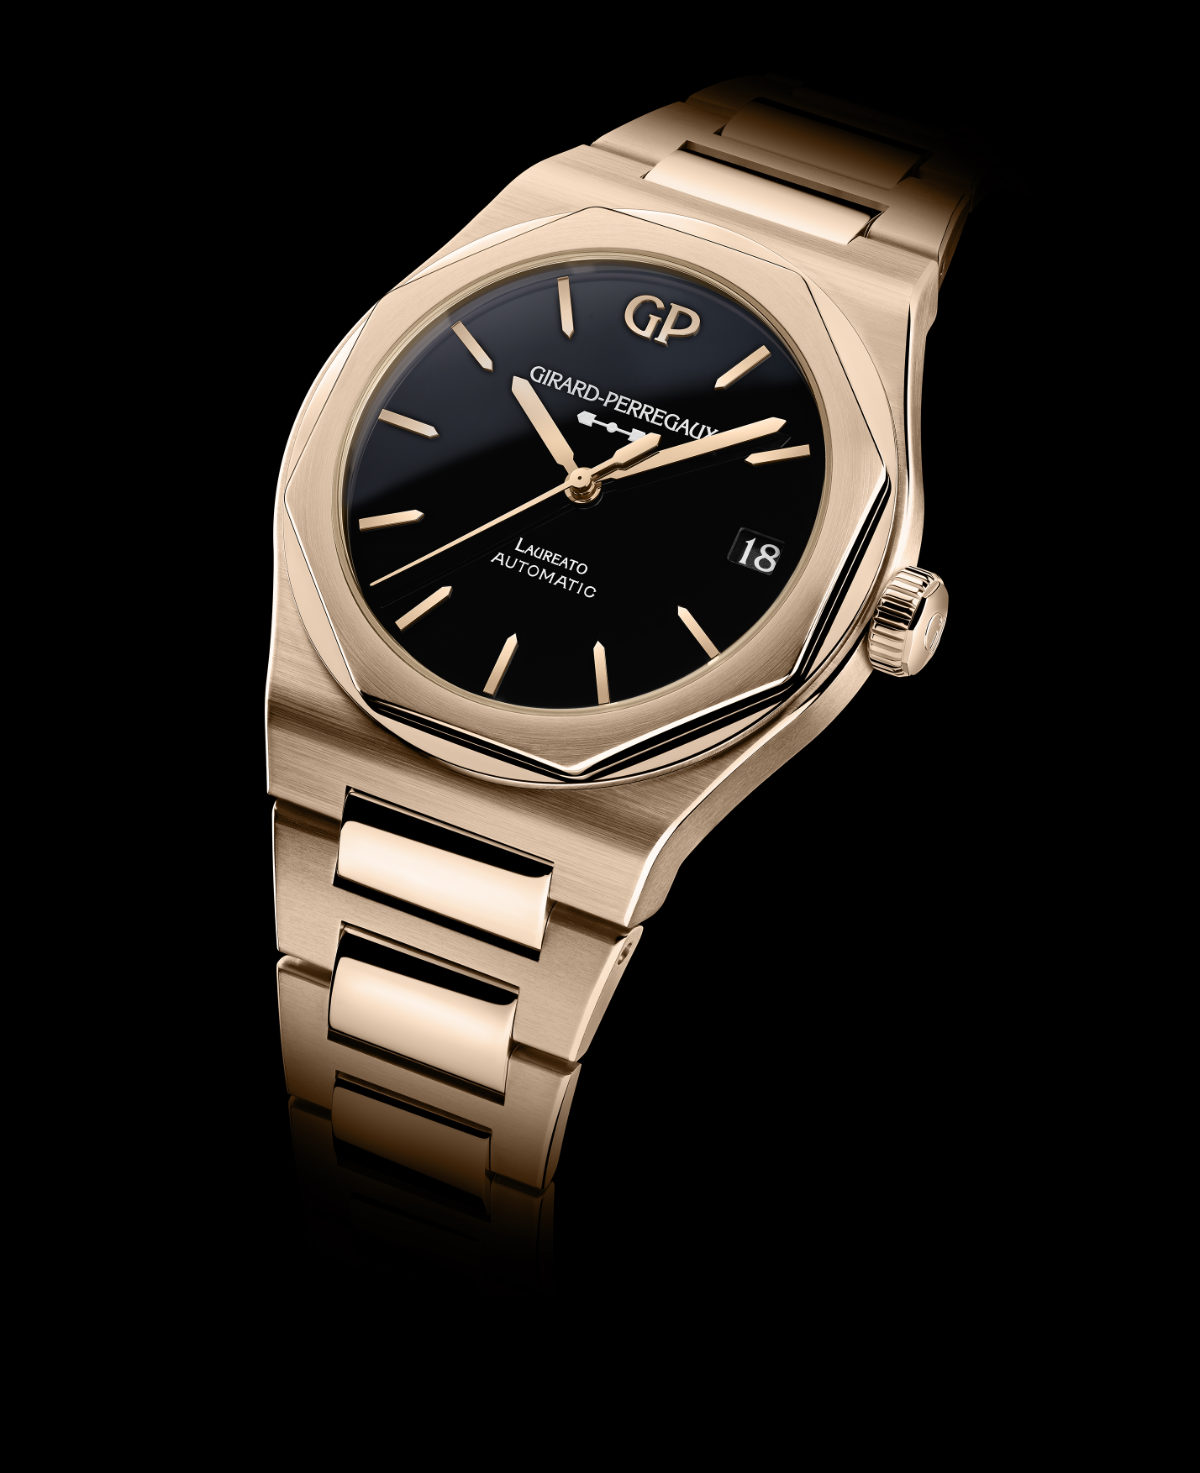 Girard-Perregaux Laureato 42mm Pink Gold & Onyx: A Symphony Of Shapes And Sumptuous Hues